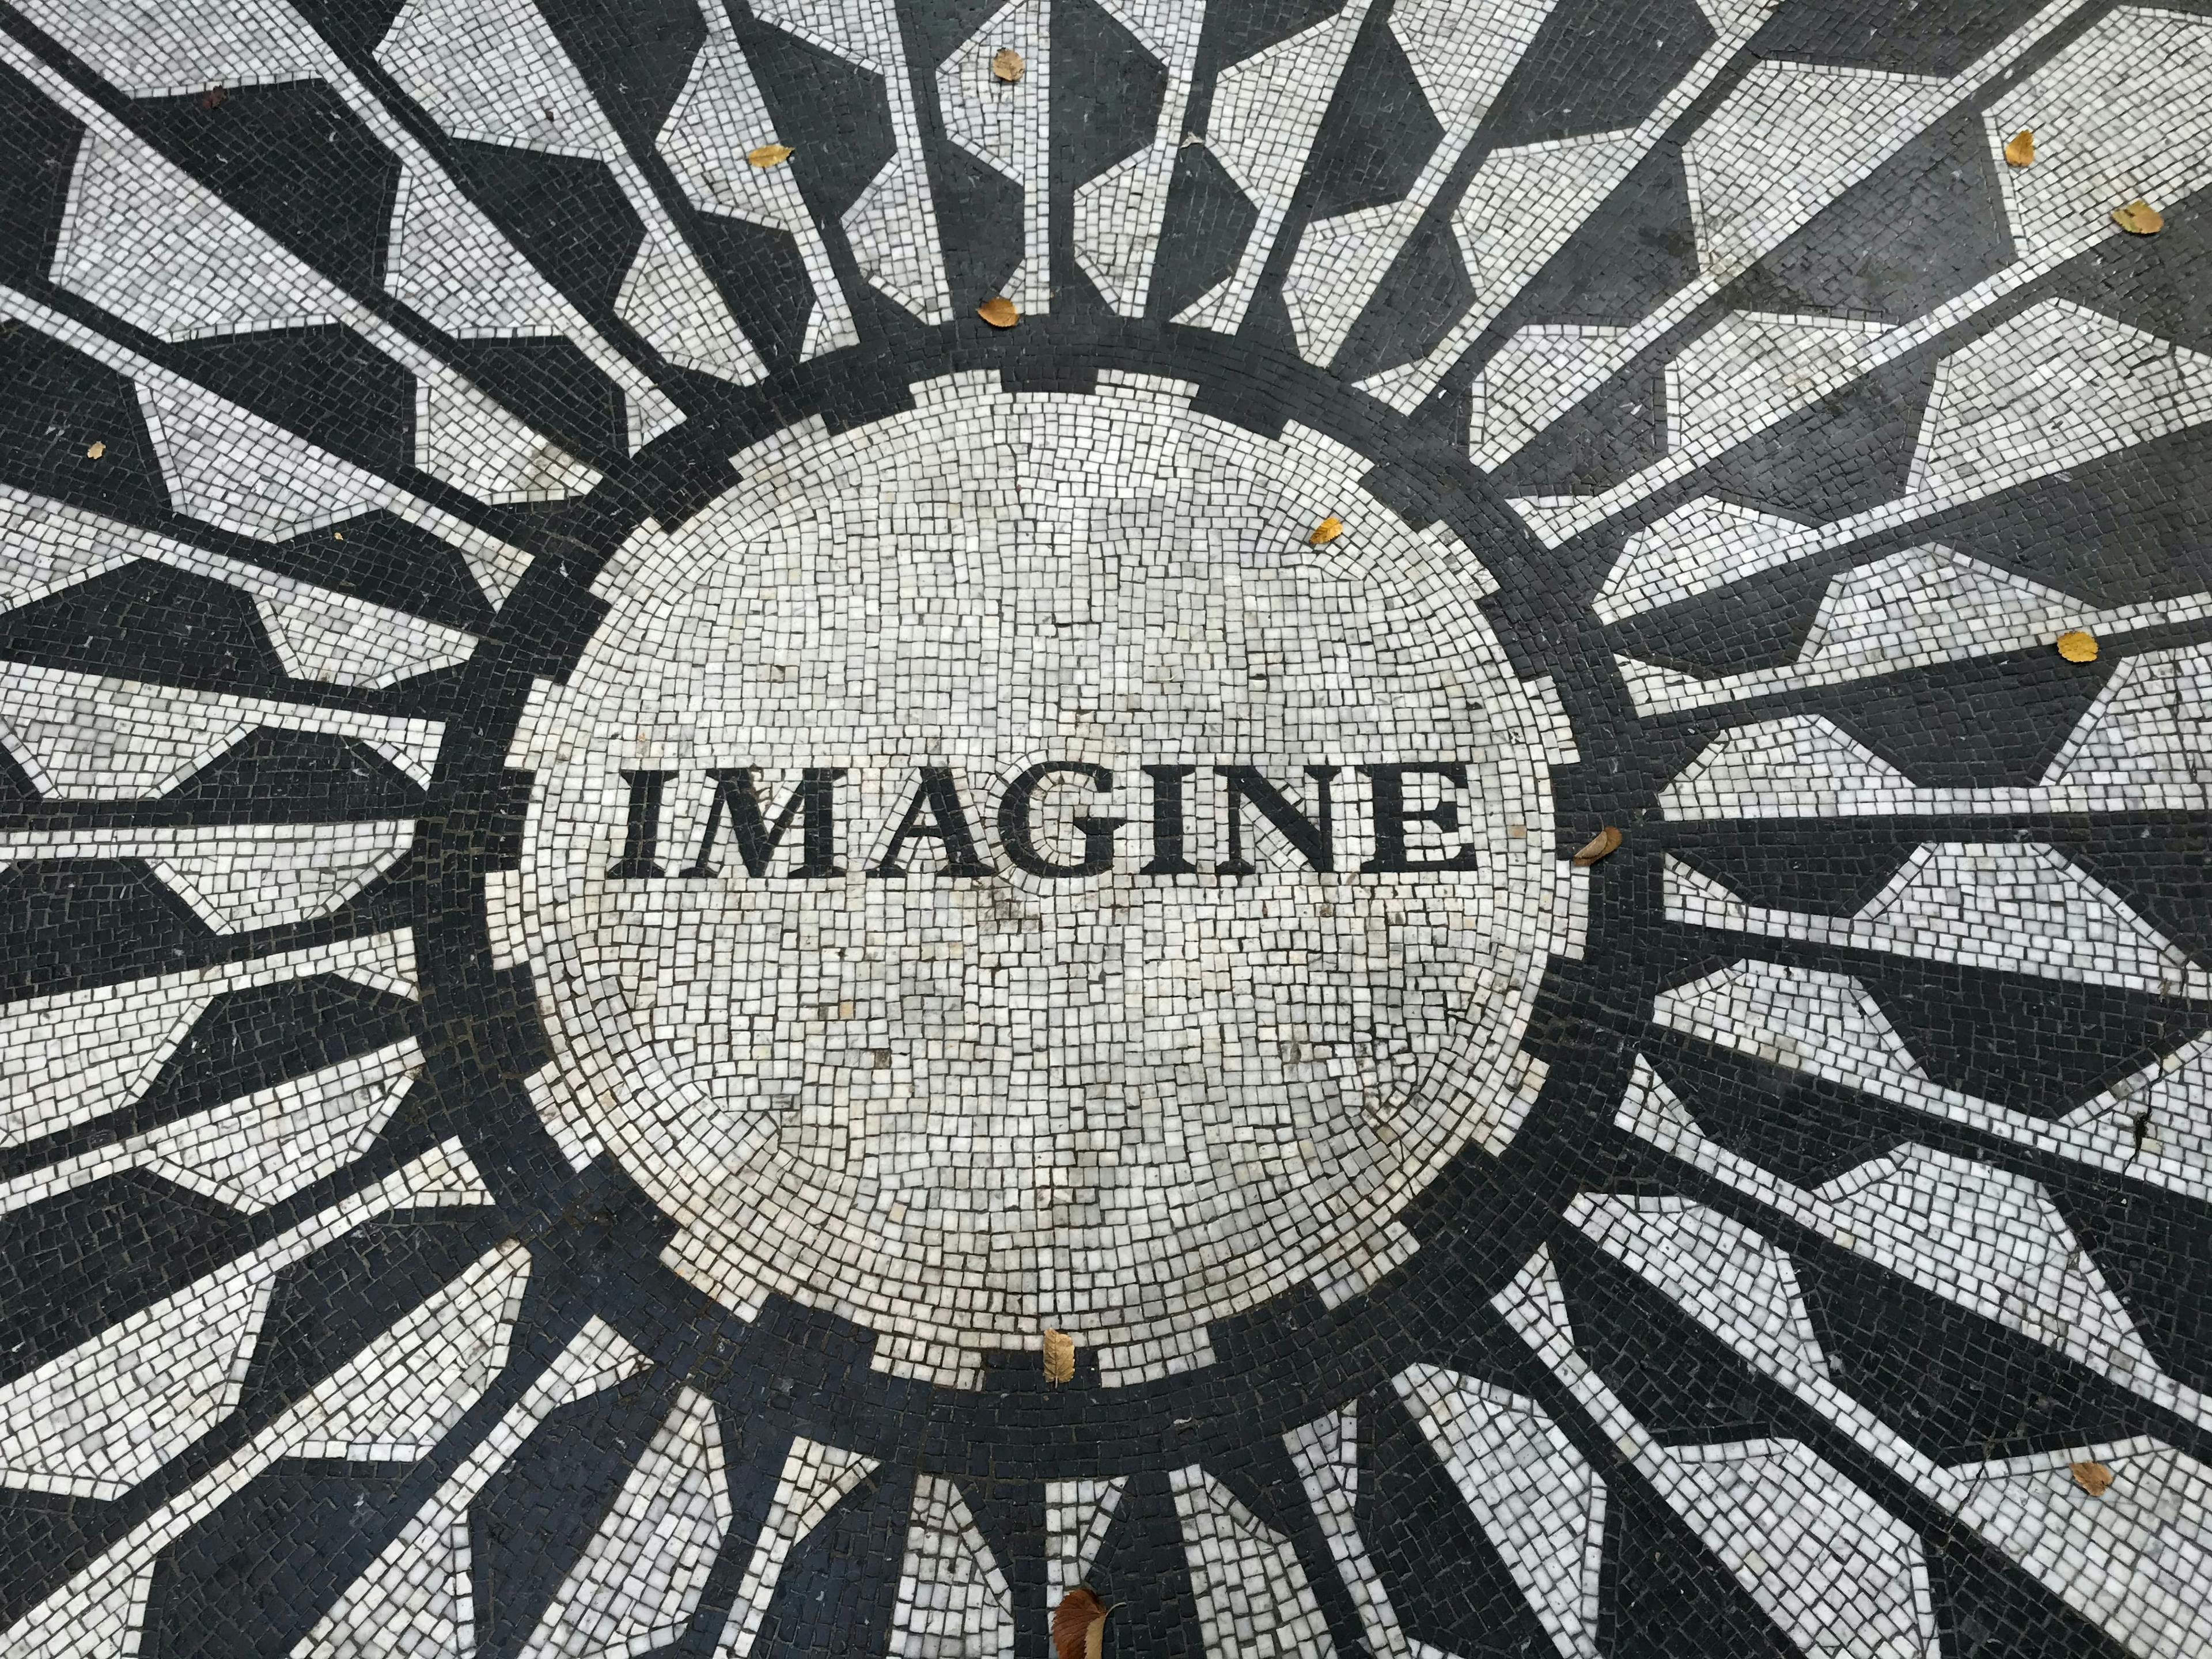 the text "imagine" on the ground within floor design